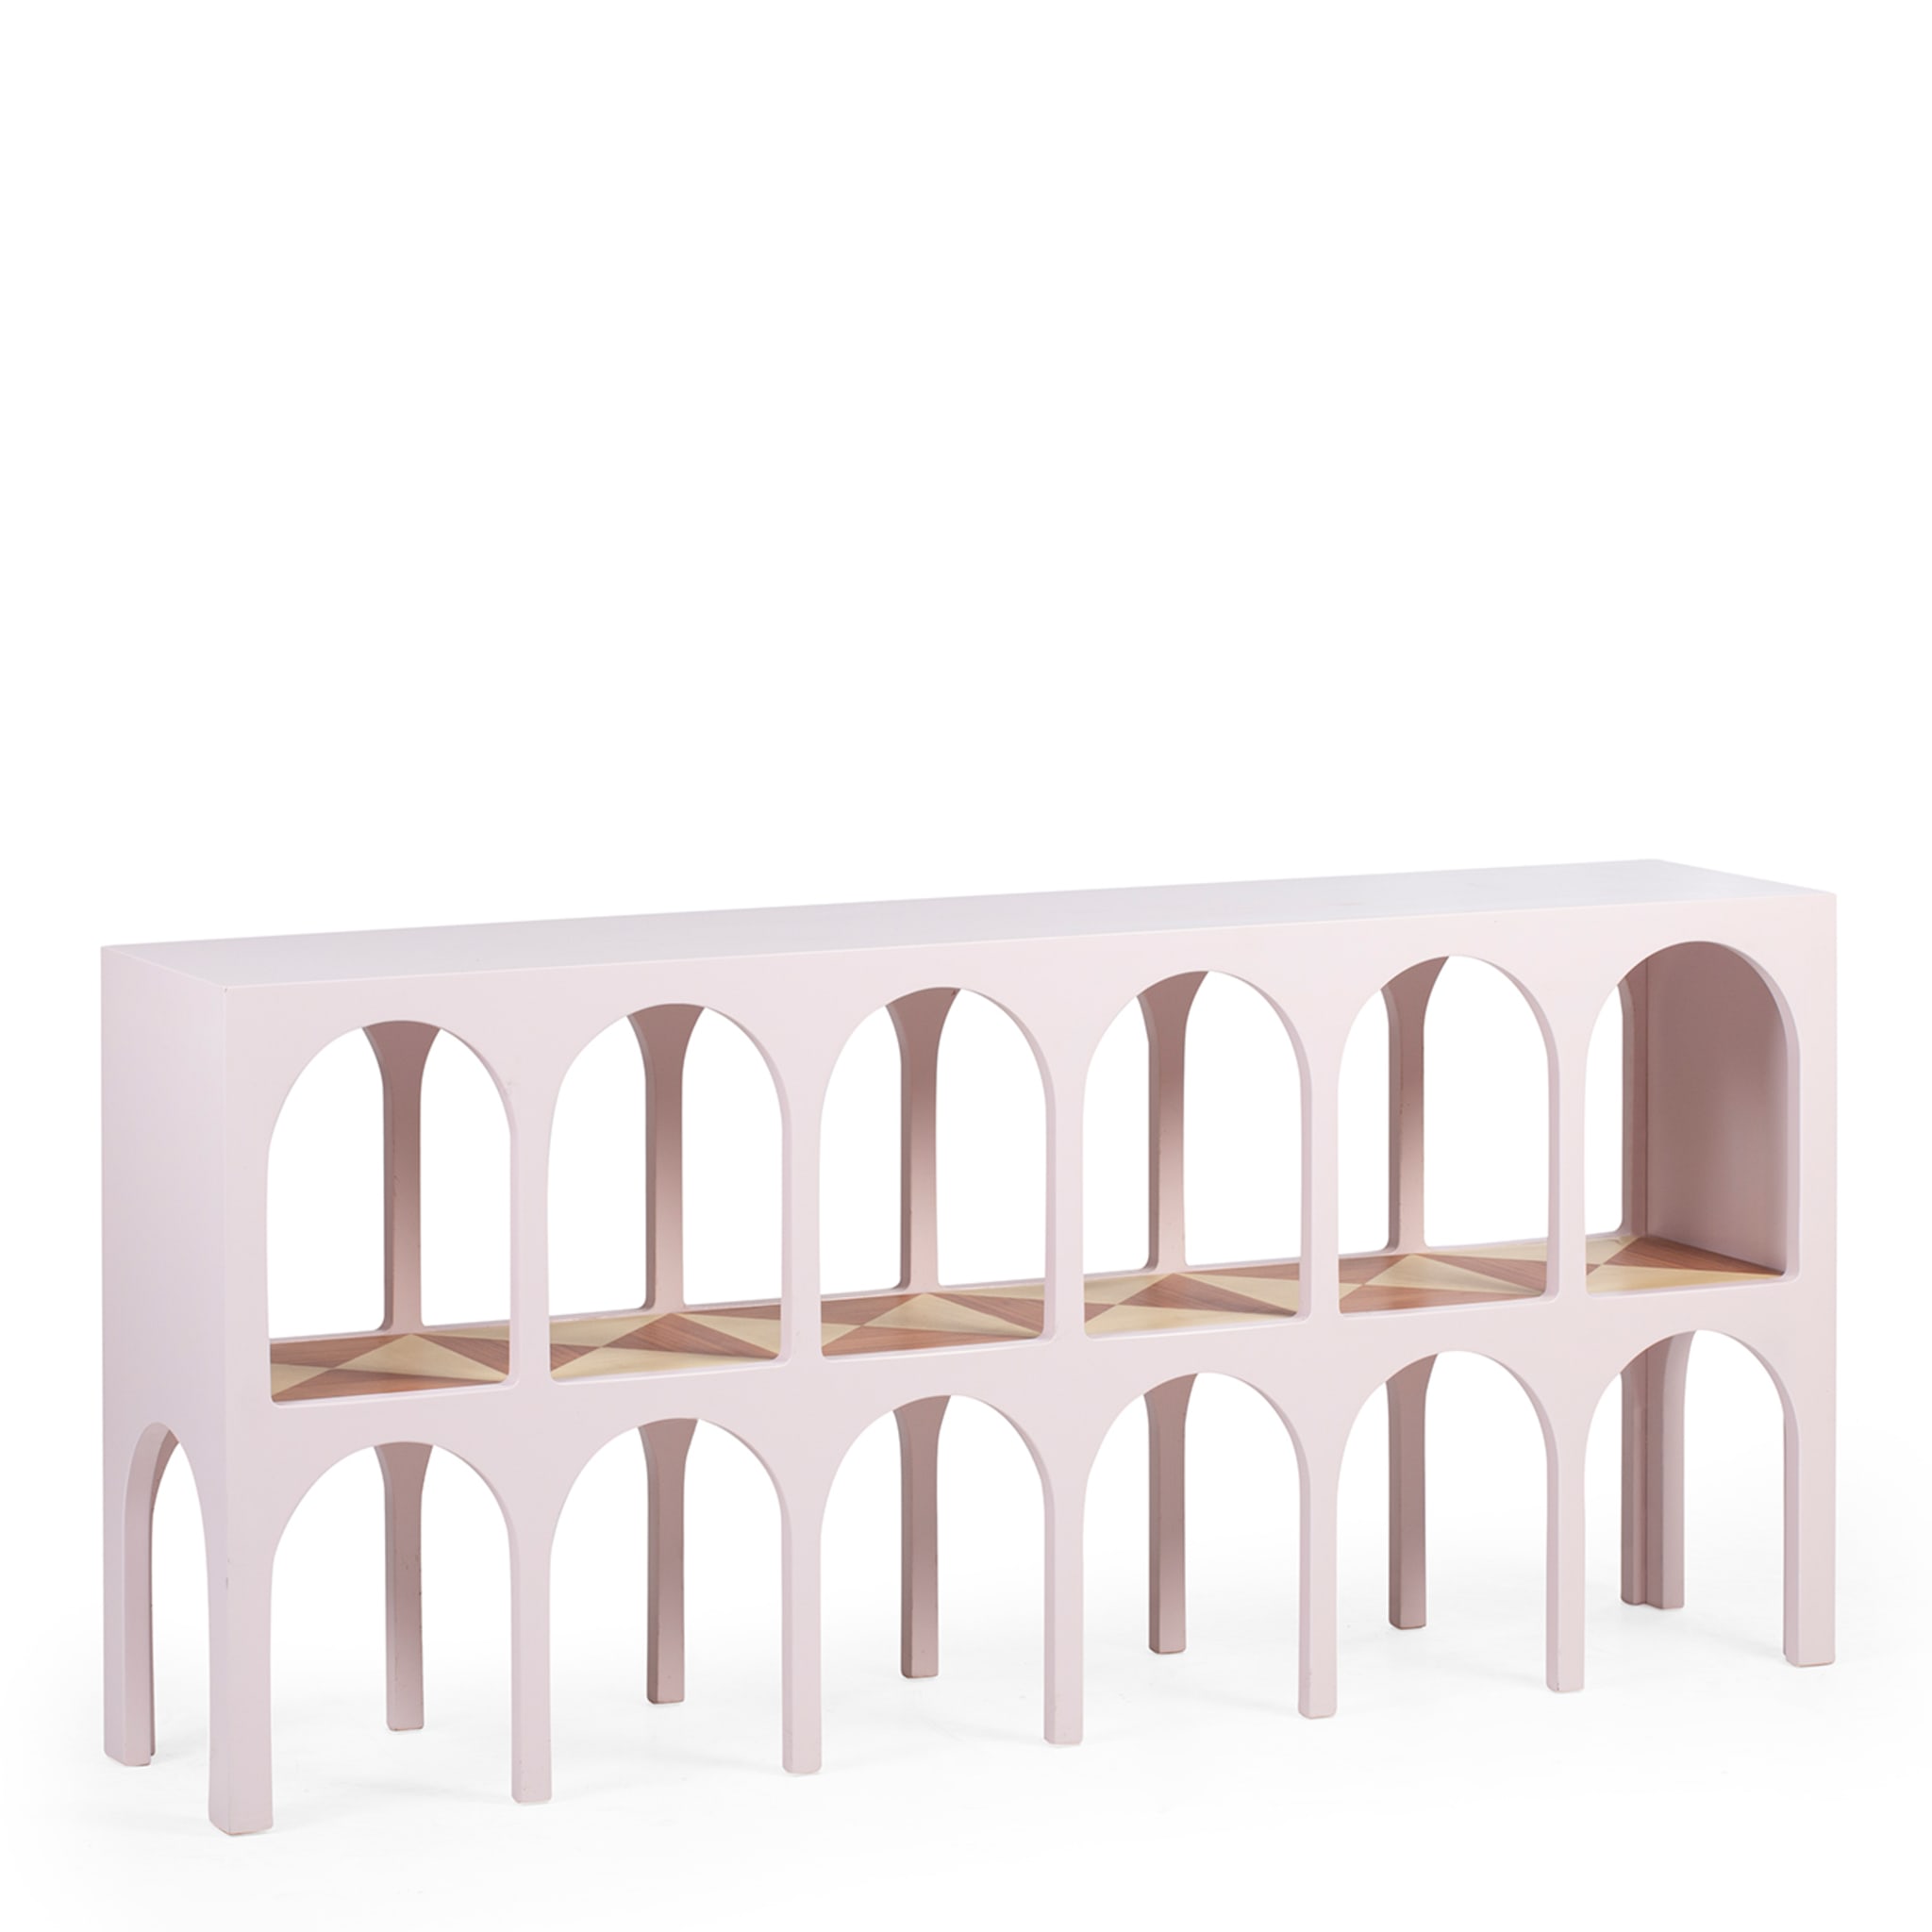 Chiostro Sideboard - Alternative view 1